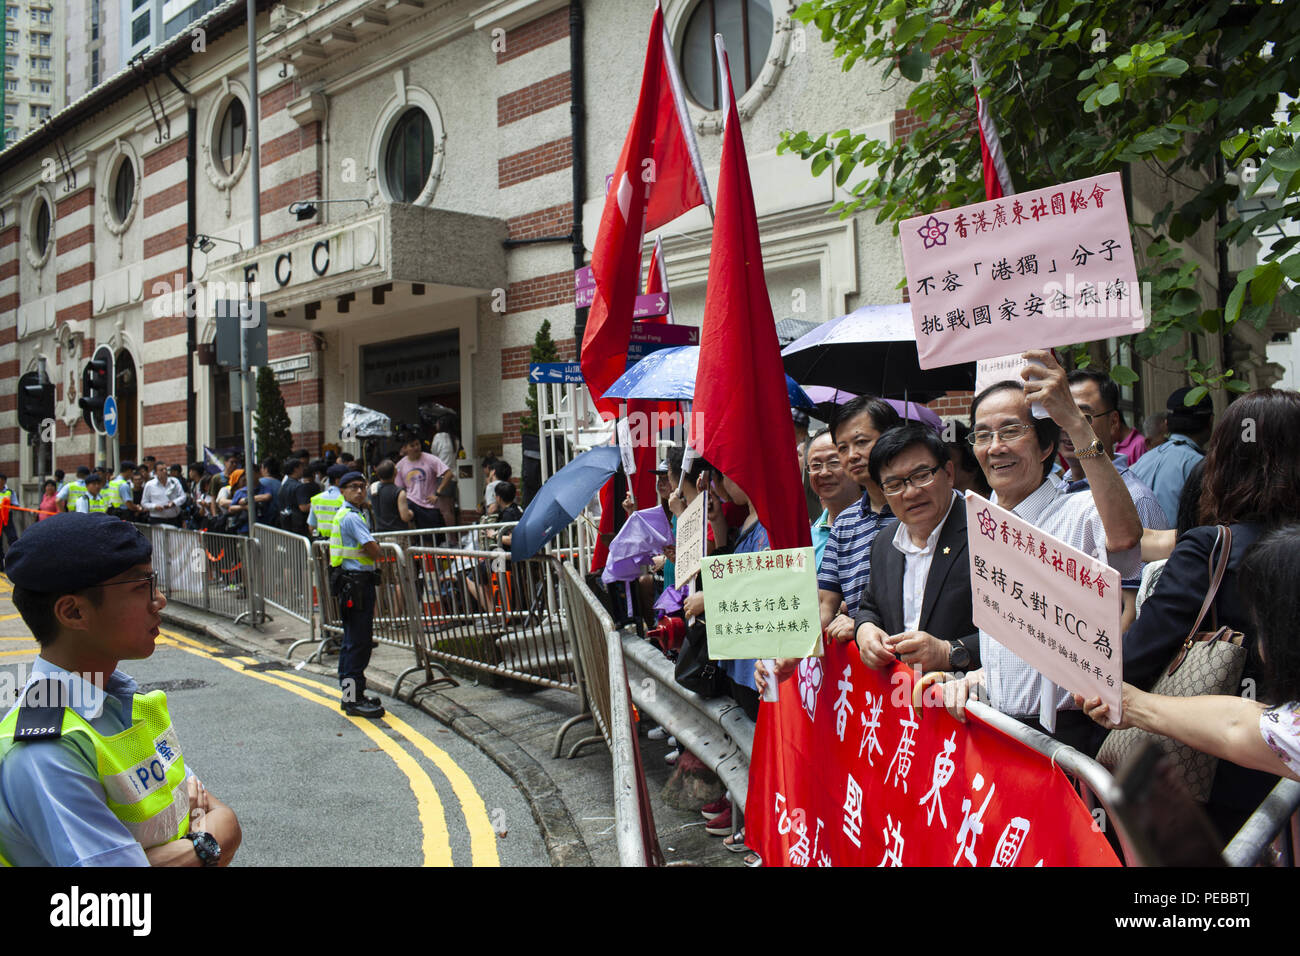 August 13, 2018 - Hong Kong, China - Pro-China demonstrators holding signs that read, â€œHong Kong Guangdong Association will not allow Hong Kong Independence elements to challenge national securityâ€. ..Two opposing groups gather outside the Foreign Correspondents Club in Hong Kong, one in support of its hosting a talk with Independent Party leader Andy Chan, and the other - in opposition. Hong Kong is taking measures to legally eliminate the party. (Credit Image: © Viola Gaskell/SOPA Images via ZUMA Wire) Stock Photo